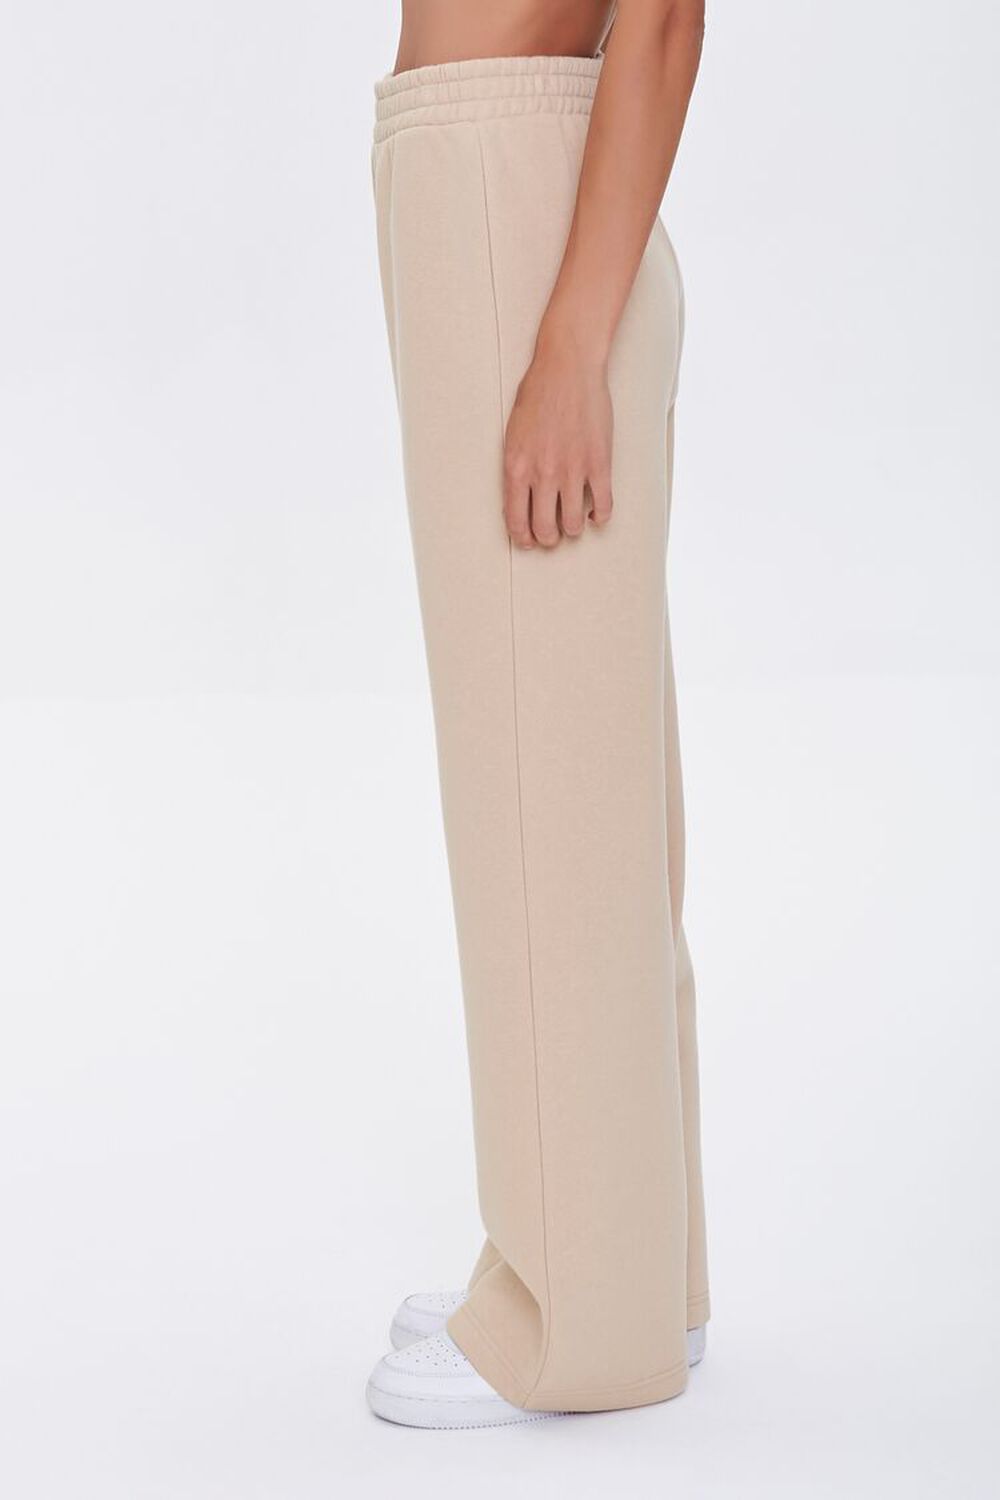 TAUPE French Terry Sweatpants, image 3